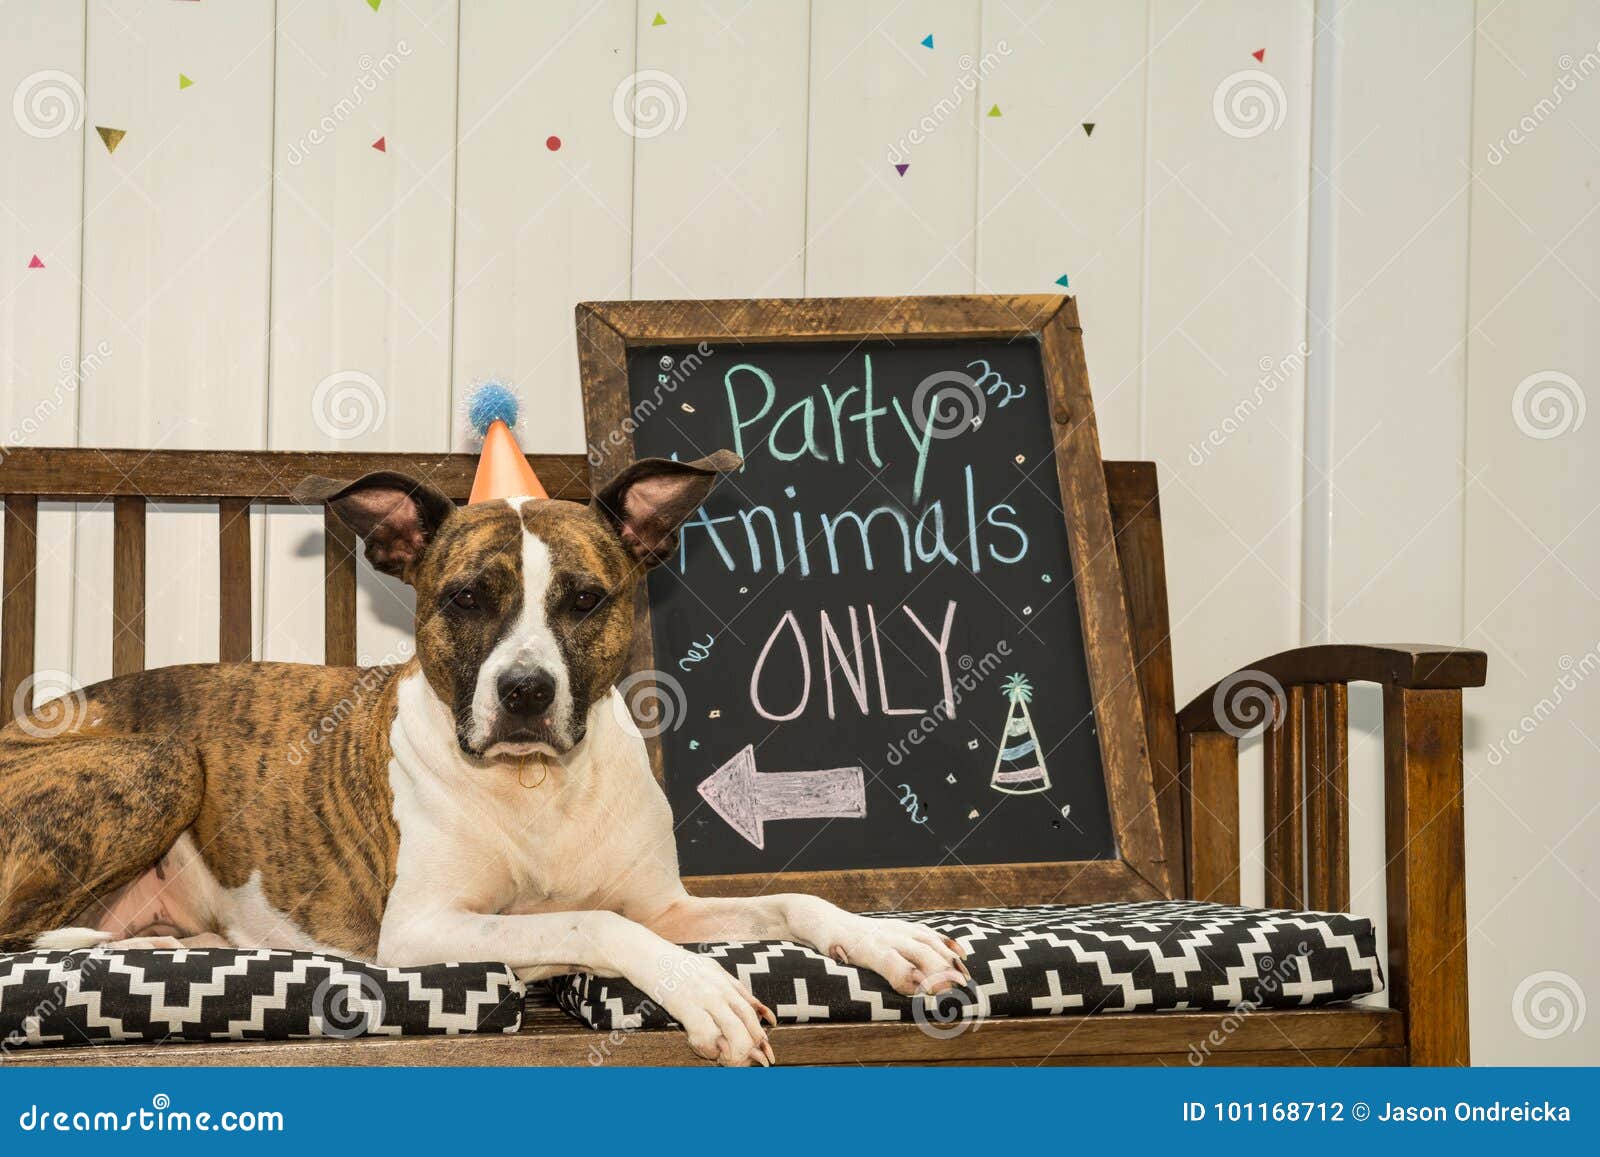 Party Animal stock photo. Image of comical, adorable - 101168712